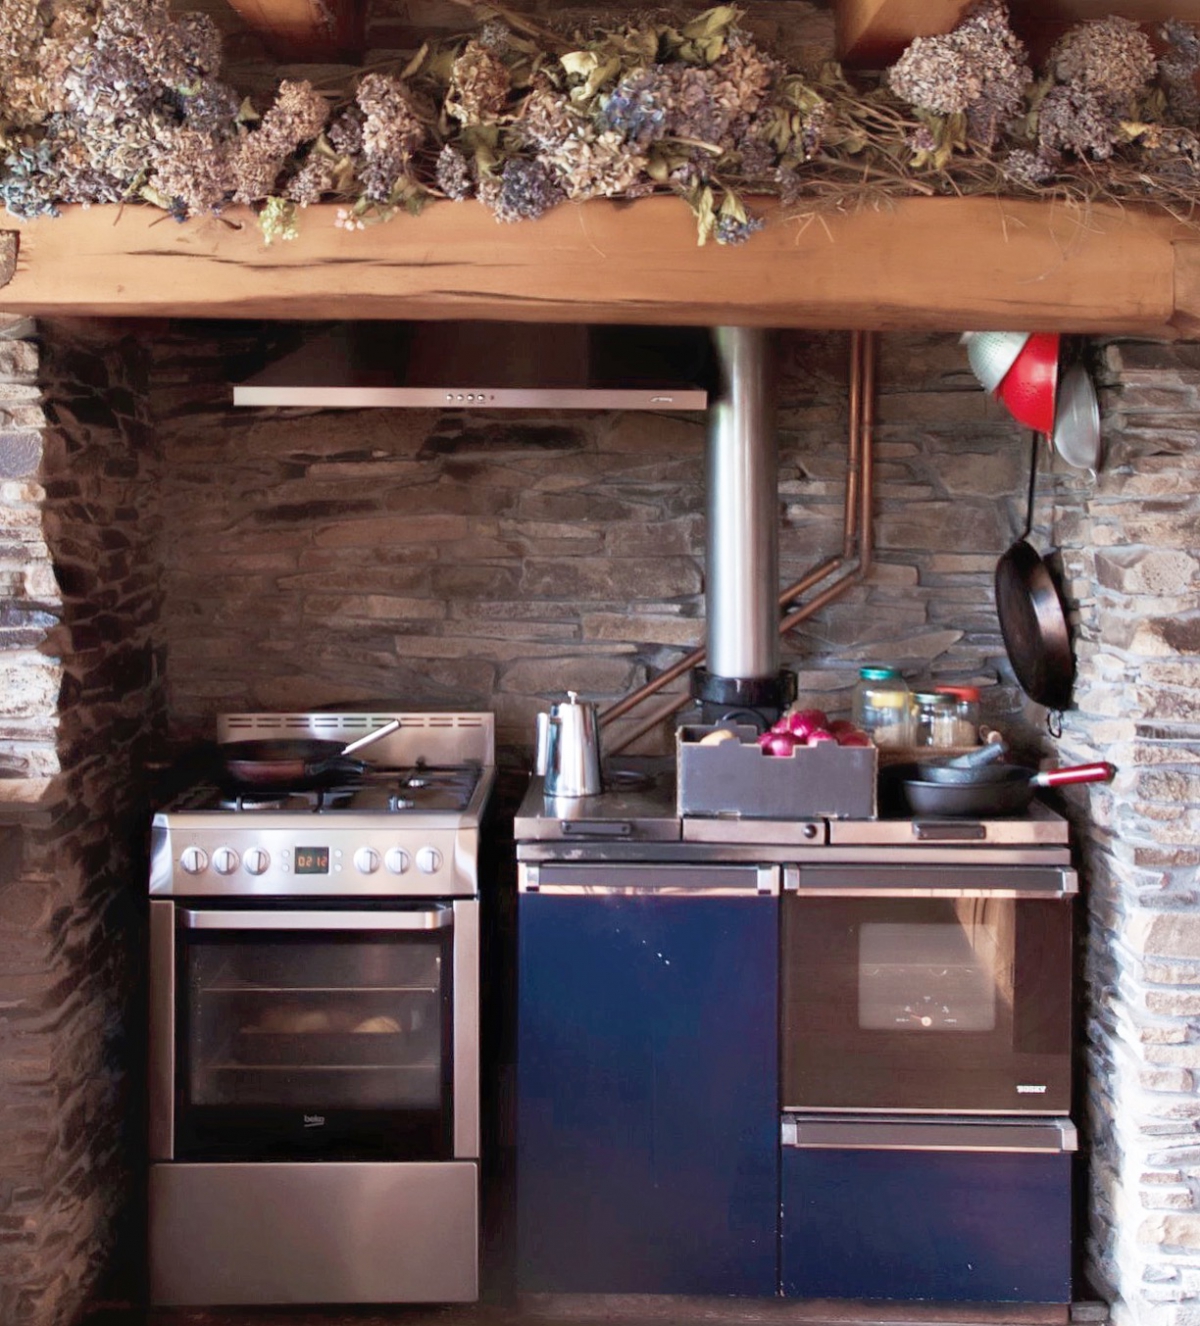 Photo of property: inglenook fireplace in kitchen